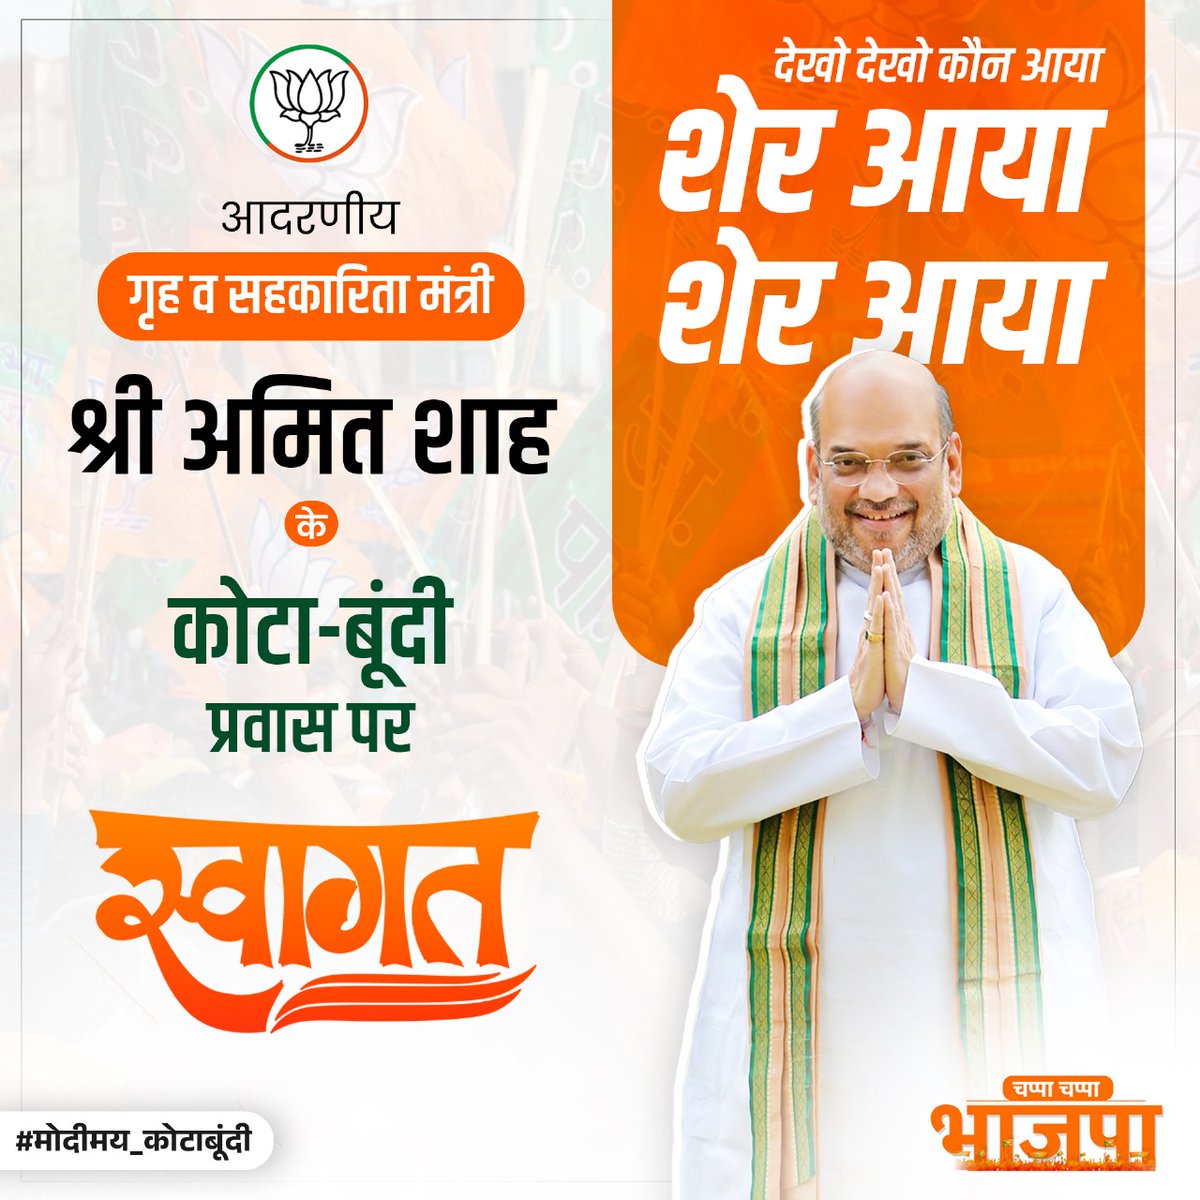 With great enthusiasm, Kota-Bundi embraces HM @AmitShah, whose commitment to India's well-being is truly commendable! #मोदीमय_कोटाबूंदी @ombirlakota @narendramodi